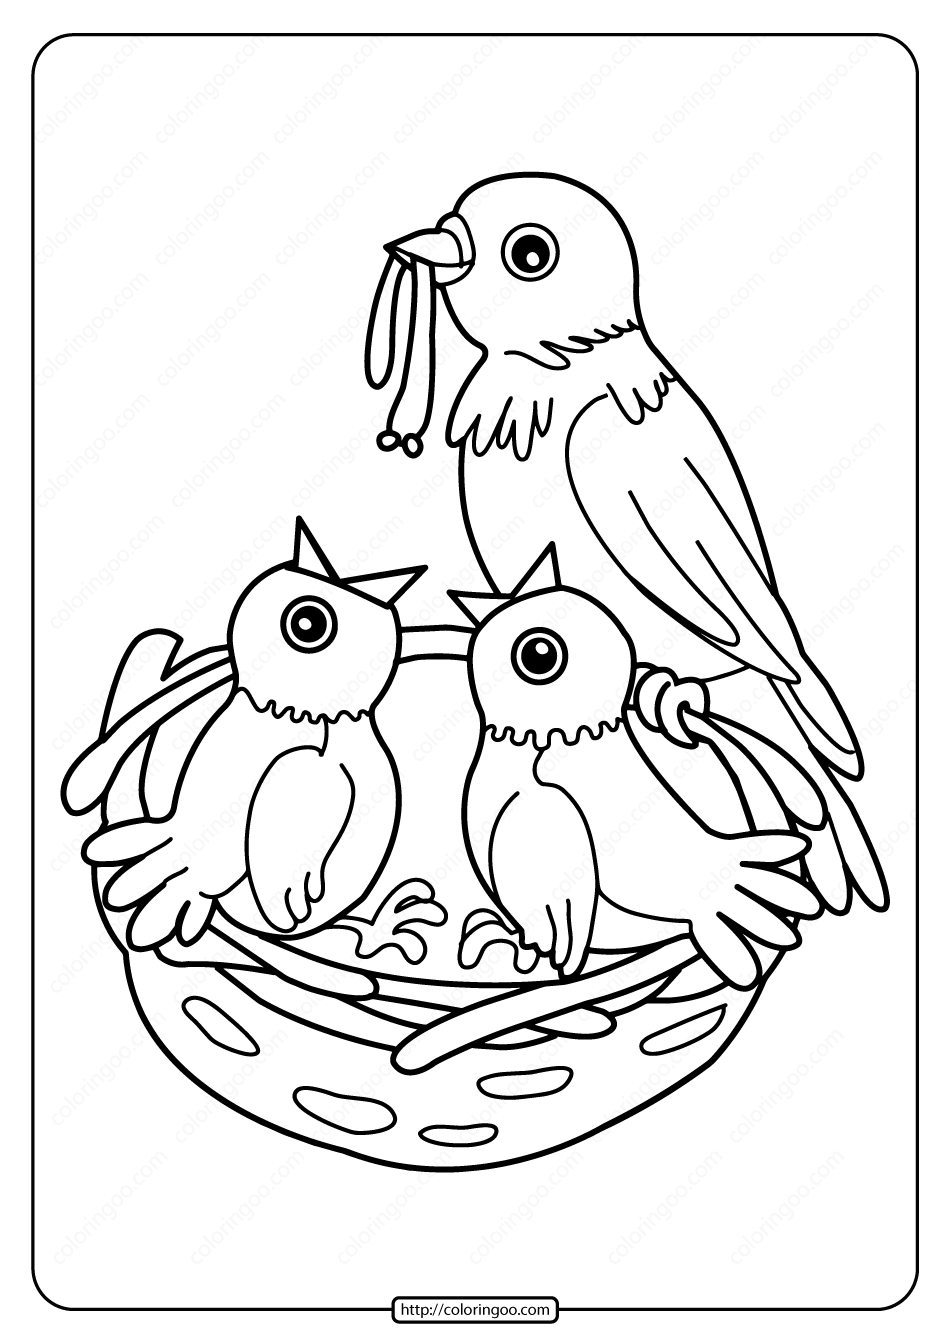 Printable birds in the nest loring page bird loring pages loring pages animal loring pages